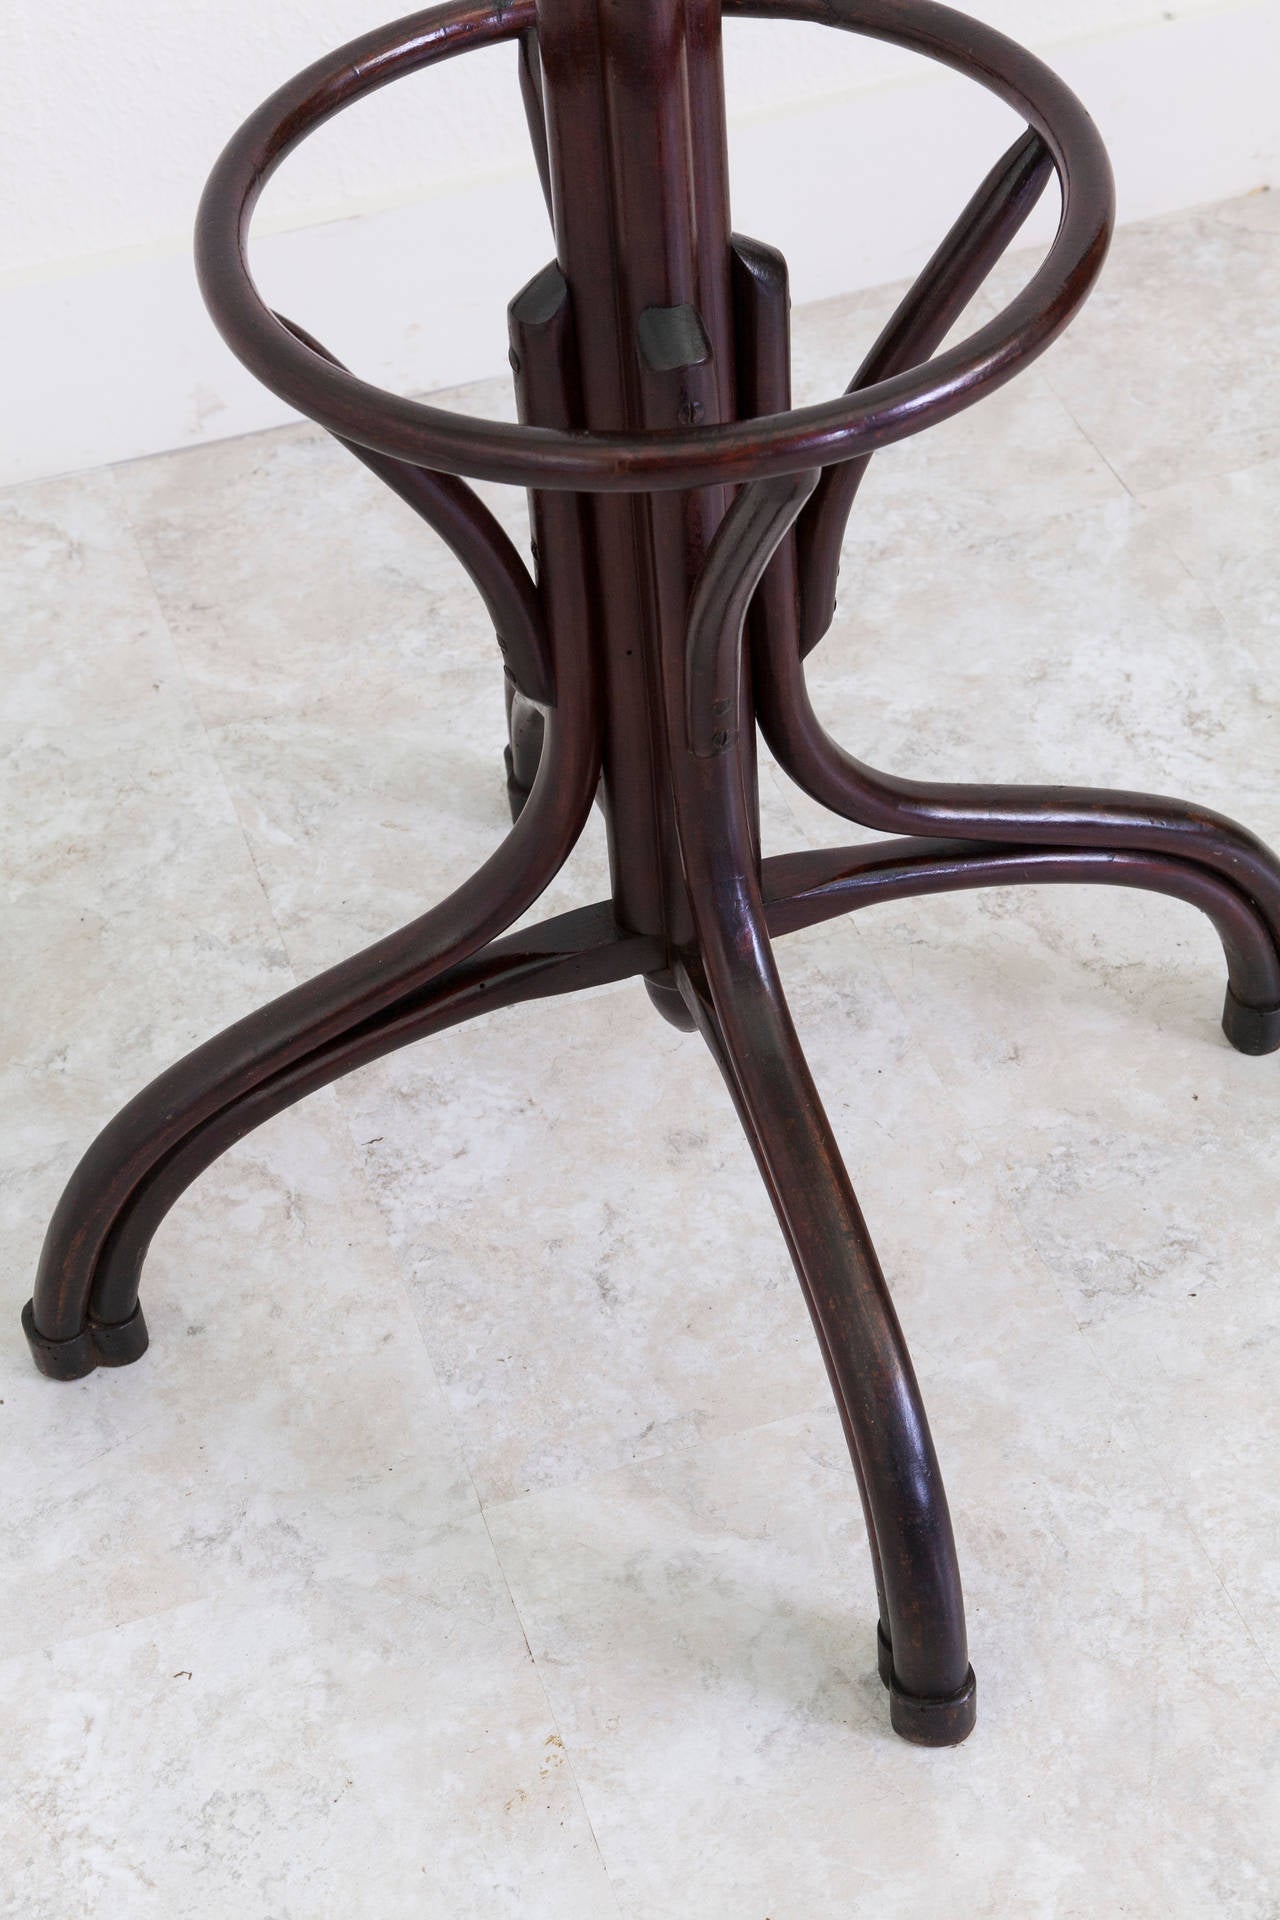 Beech French Bentwood Thonet Style Coat Rack or Hall Tree, circa 1900